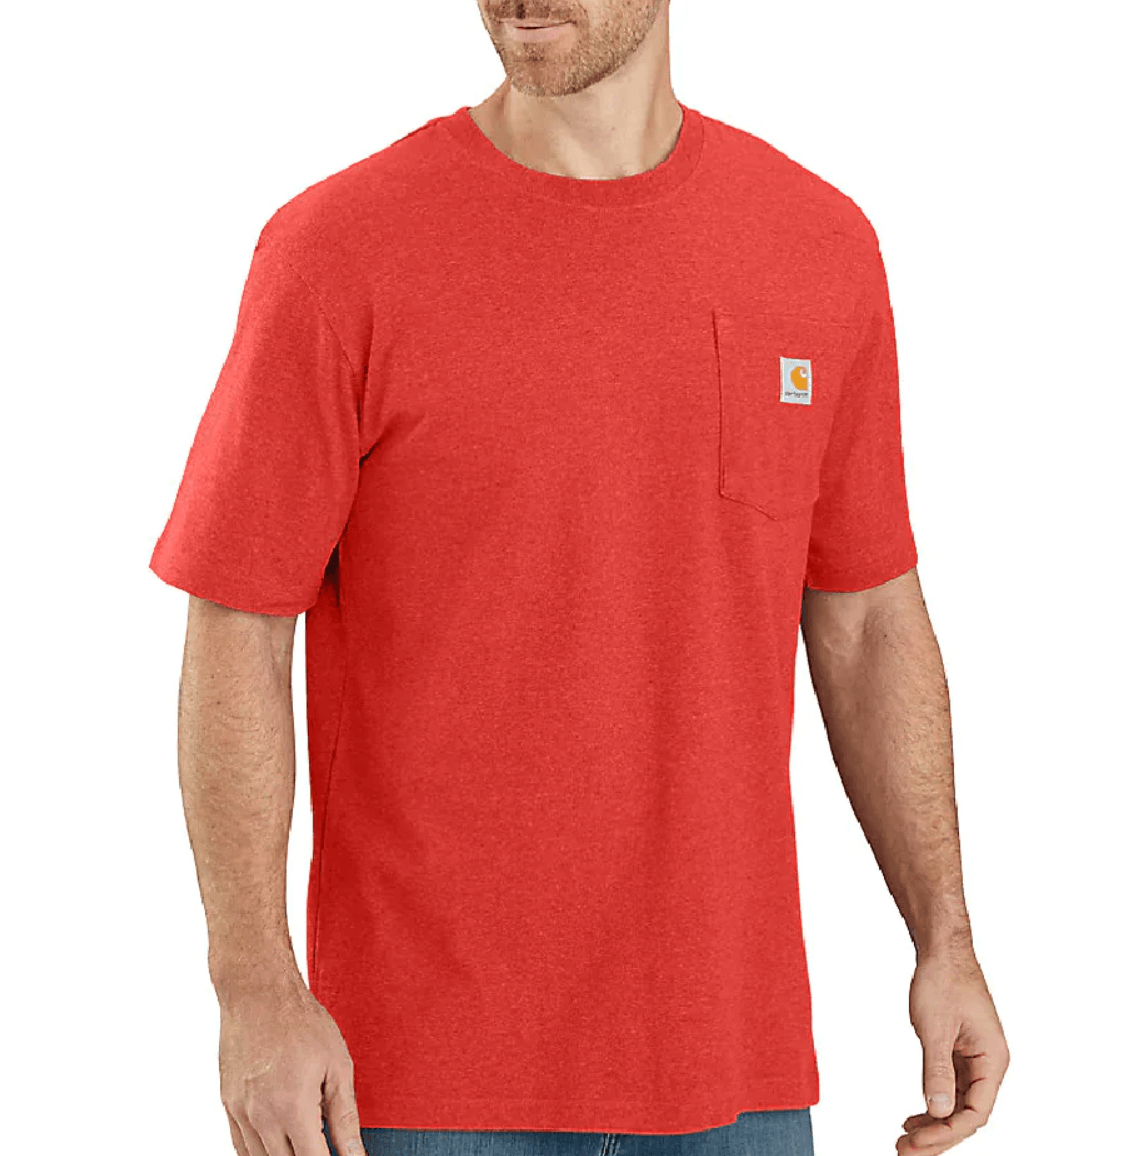 K87 - Loose fit heavyweight short-sleeve pocket t-shirt - Fire Red Heather (Seasonal) - Purpose-Built / Home of the Trades